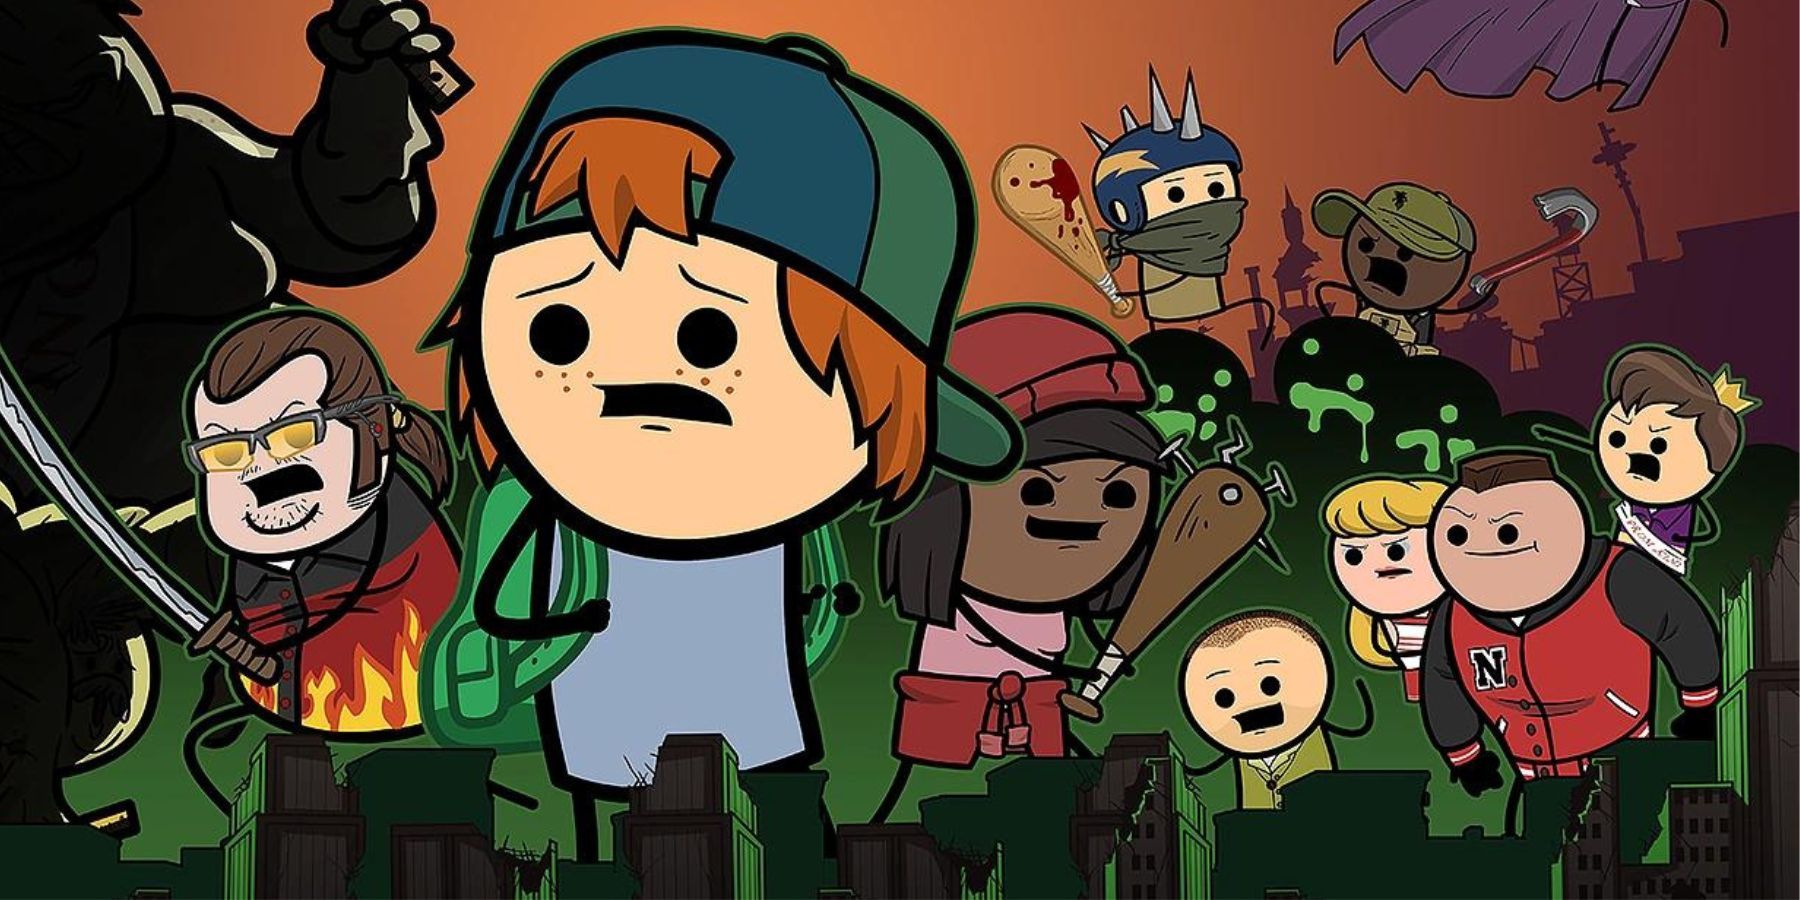 Cyanide & Happiness - Freakpocalypse review: Point & click for the sick